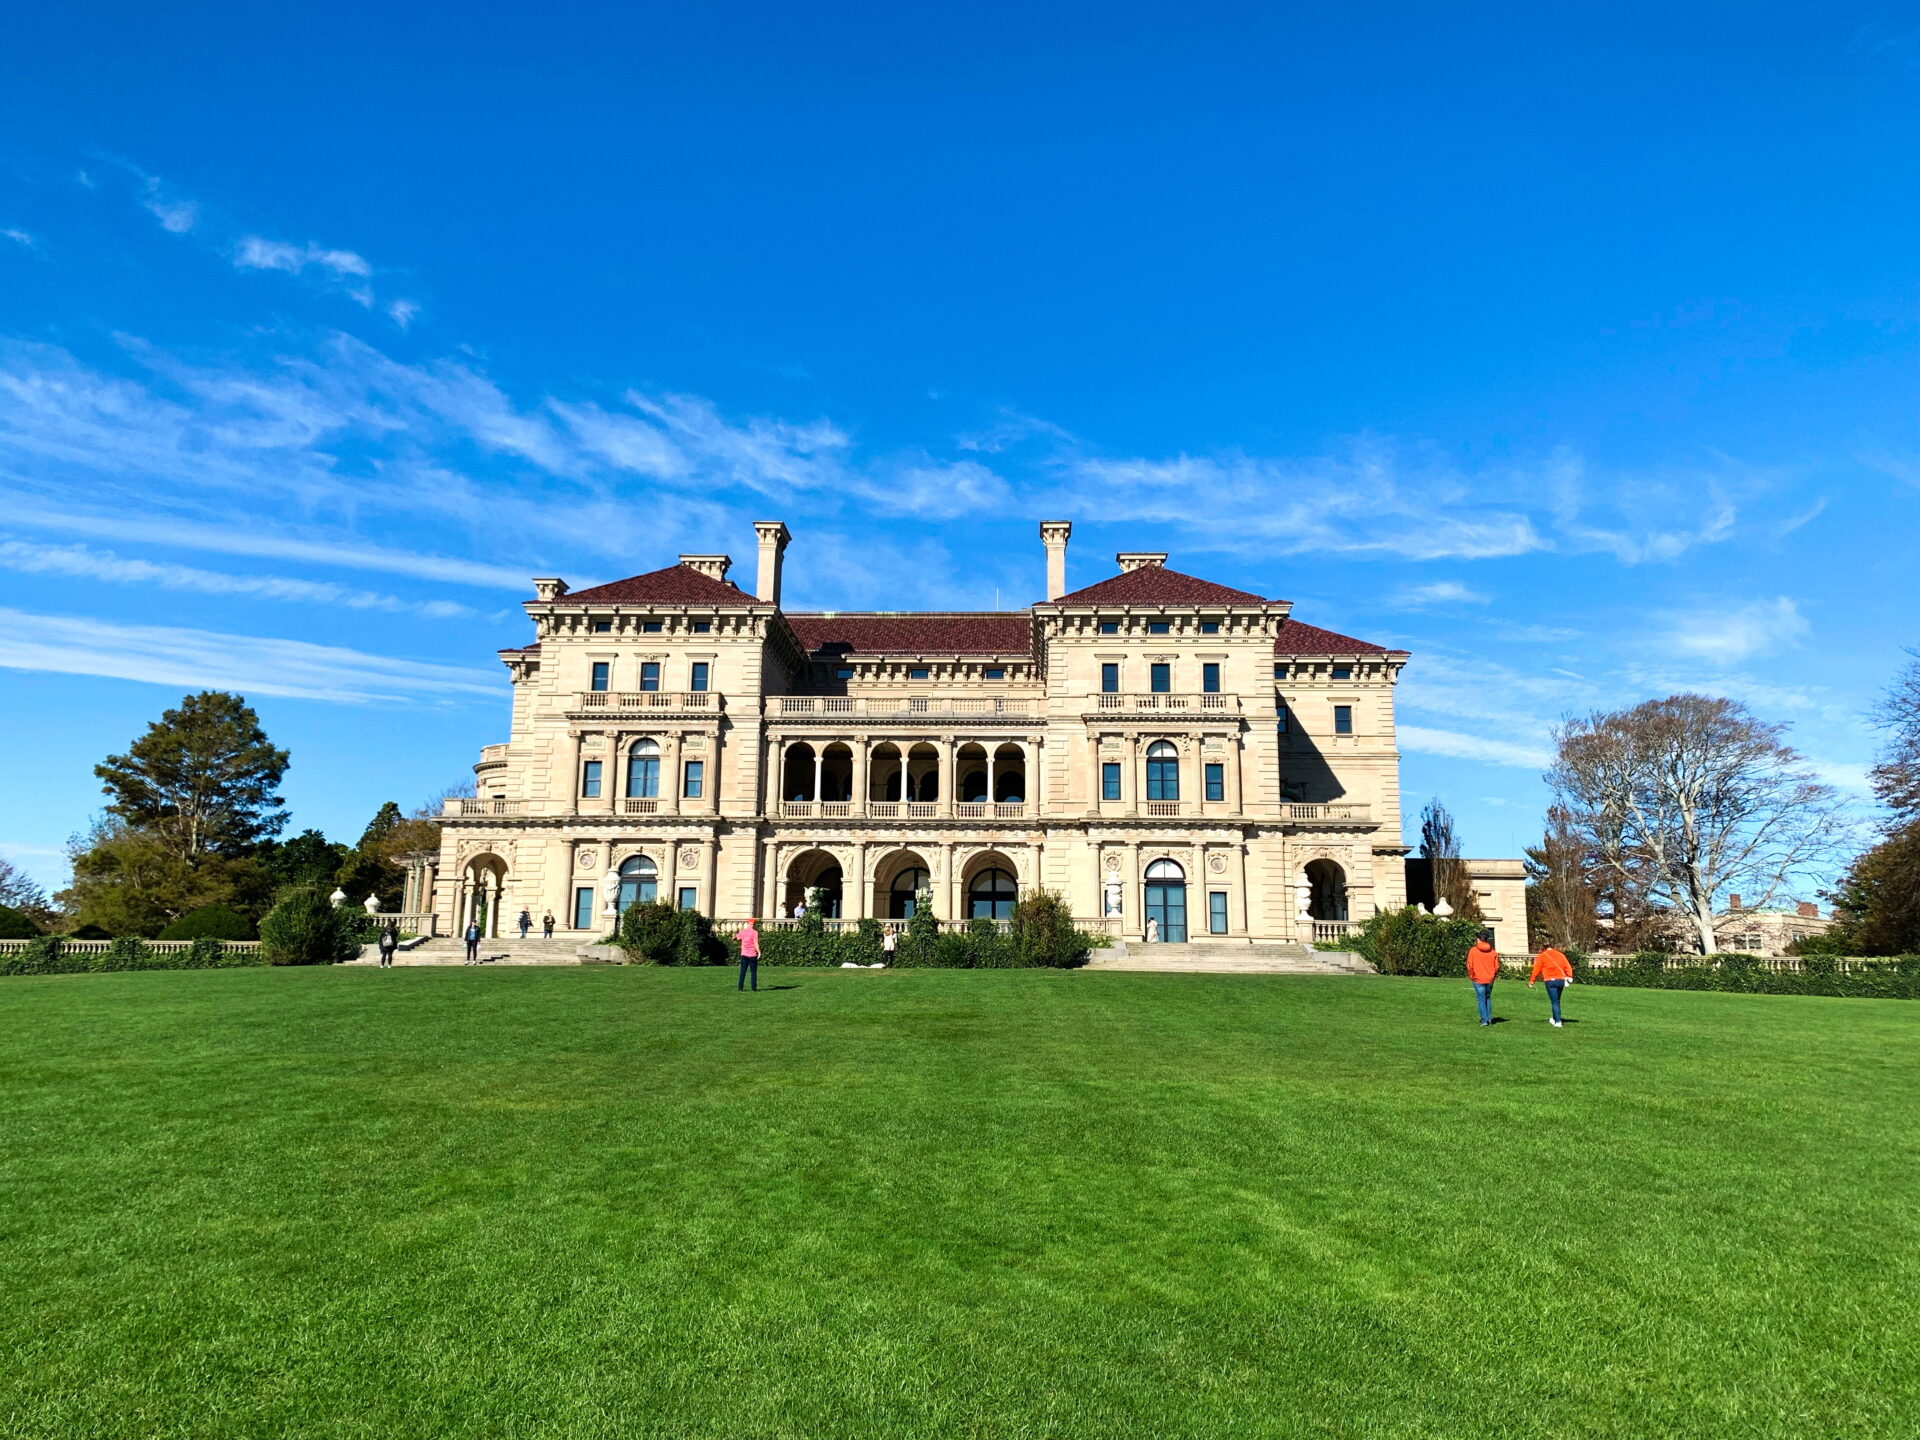 The Best Mansions to Visit in Newport, Rhode Island